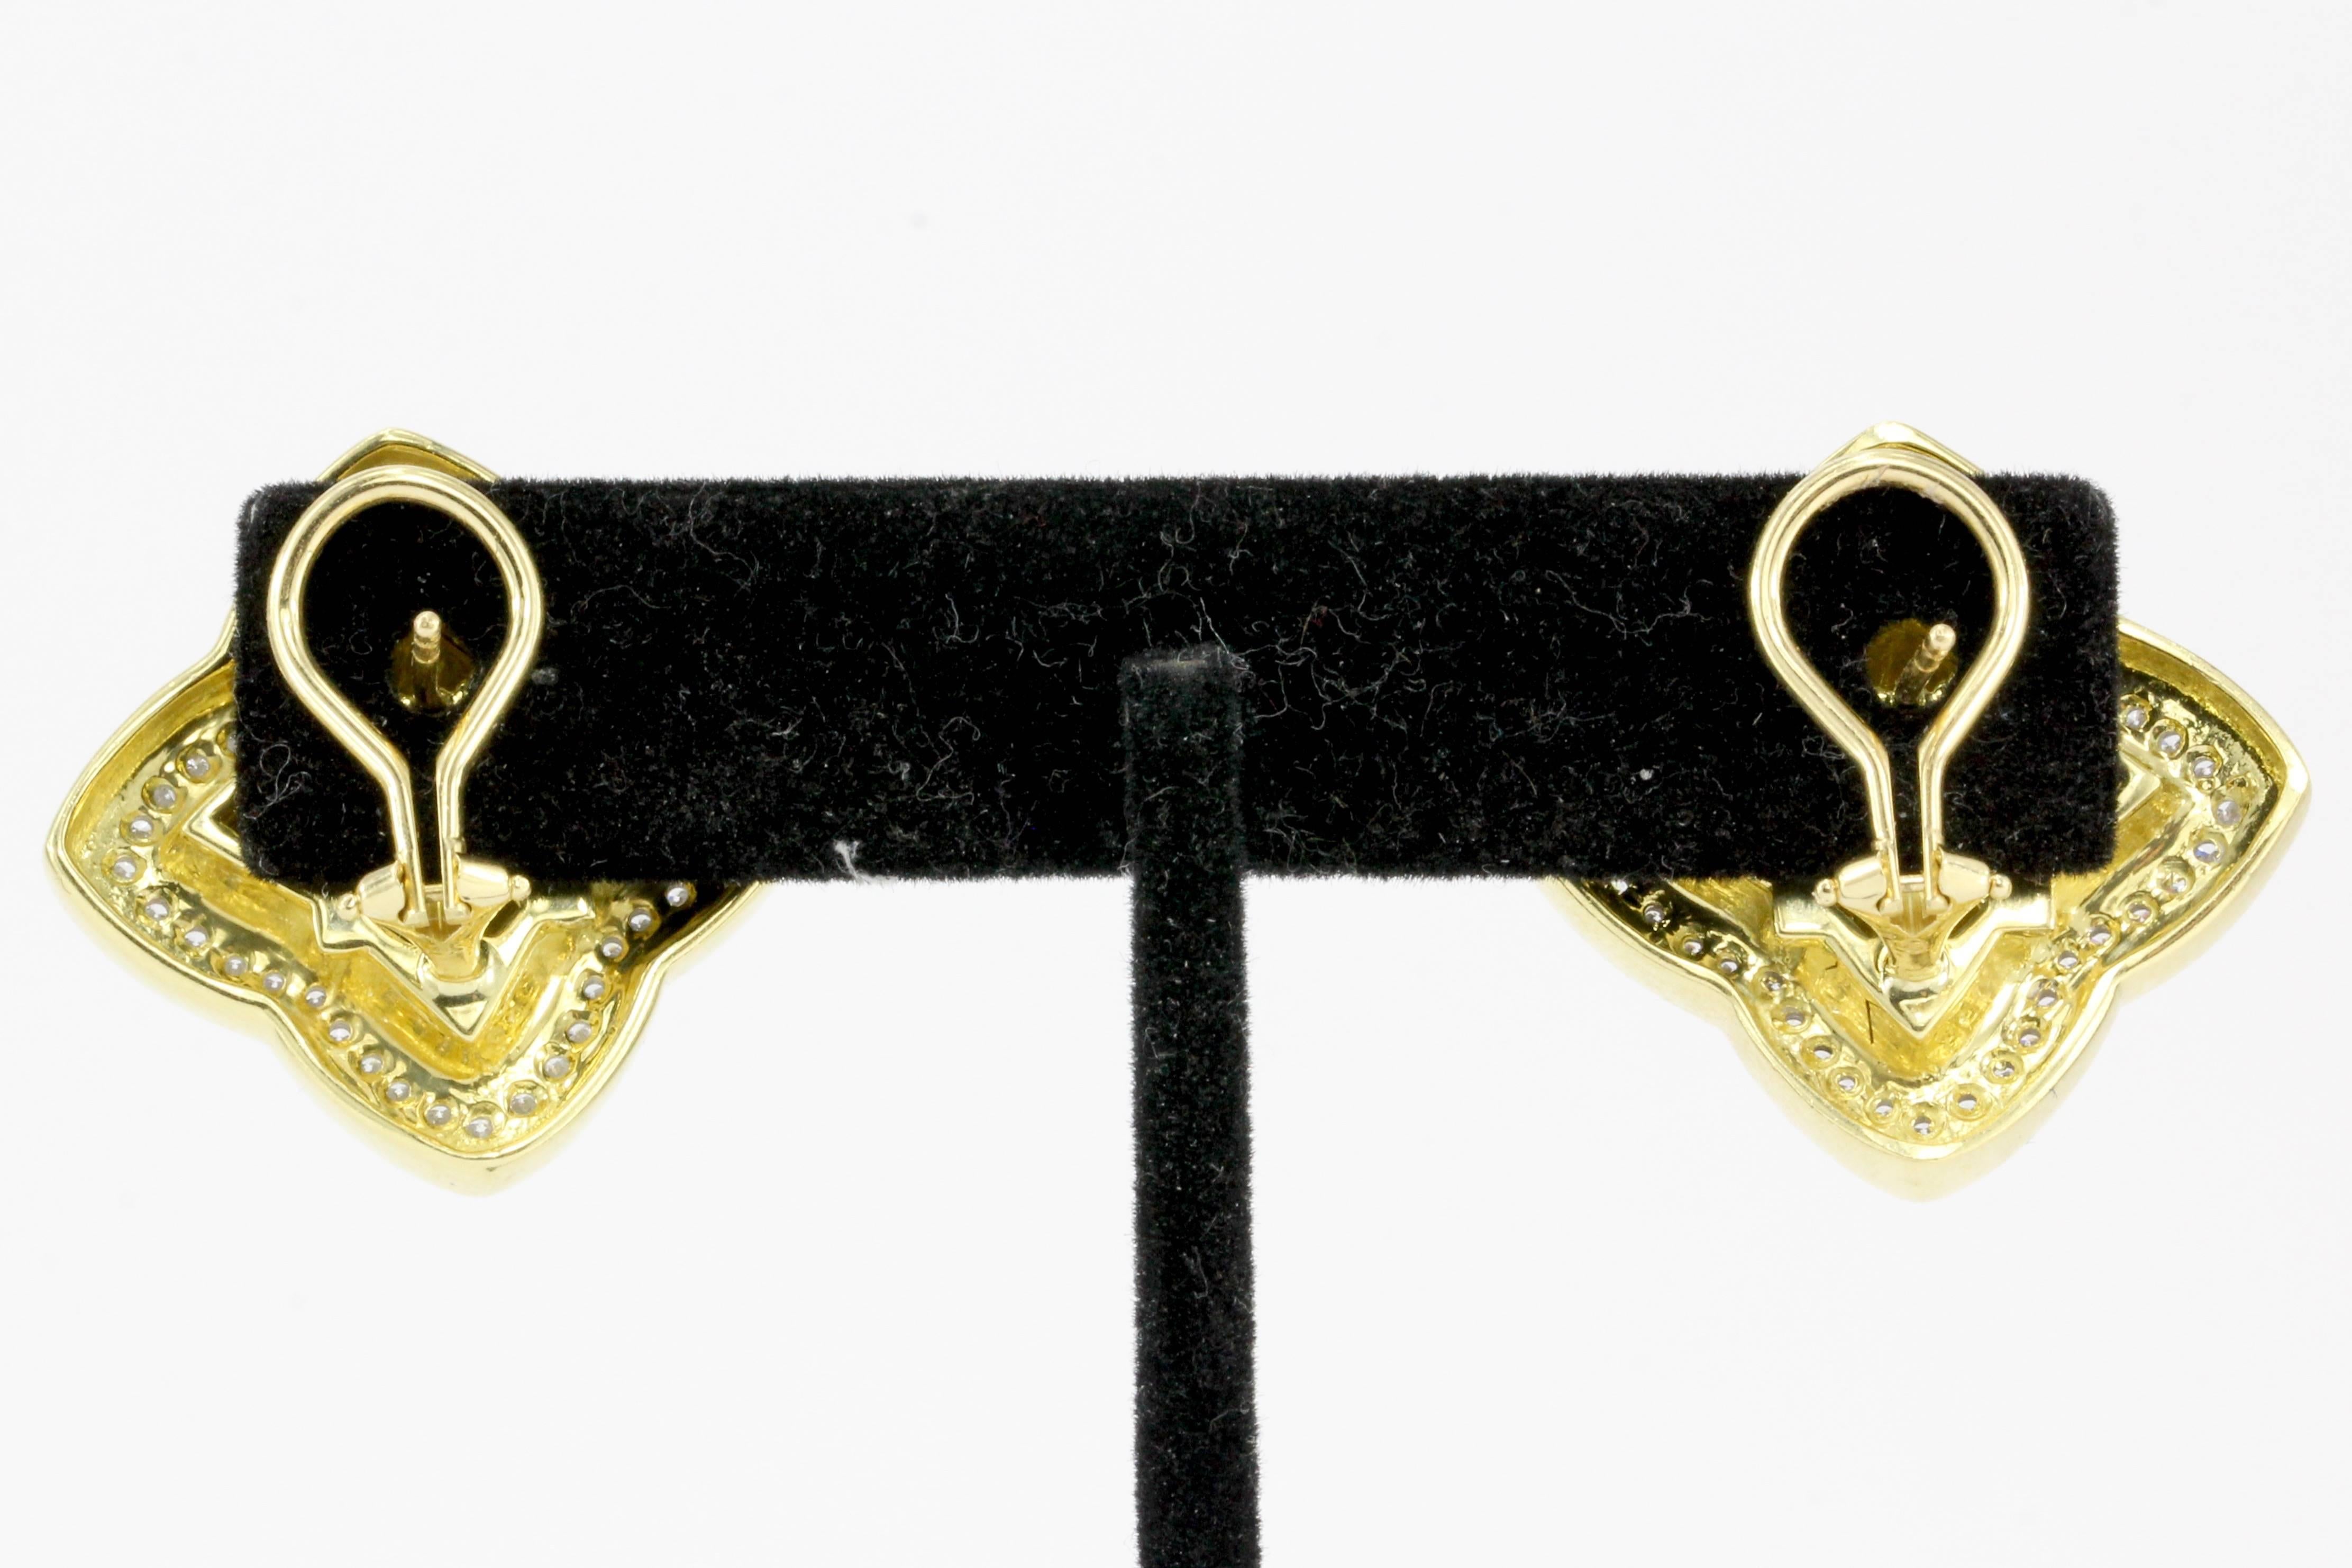 Hallmarks: D.Y 750

Composition: 18K Yellow Gold

Primary Stone: Diamond

Earring Measurement: 1.25